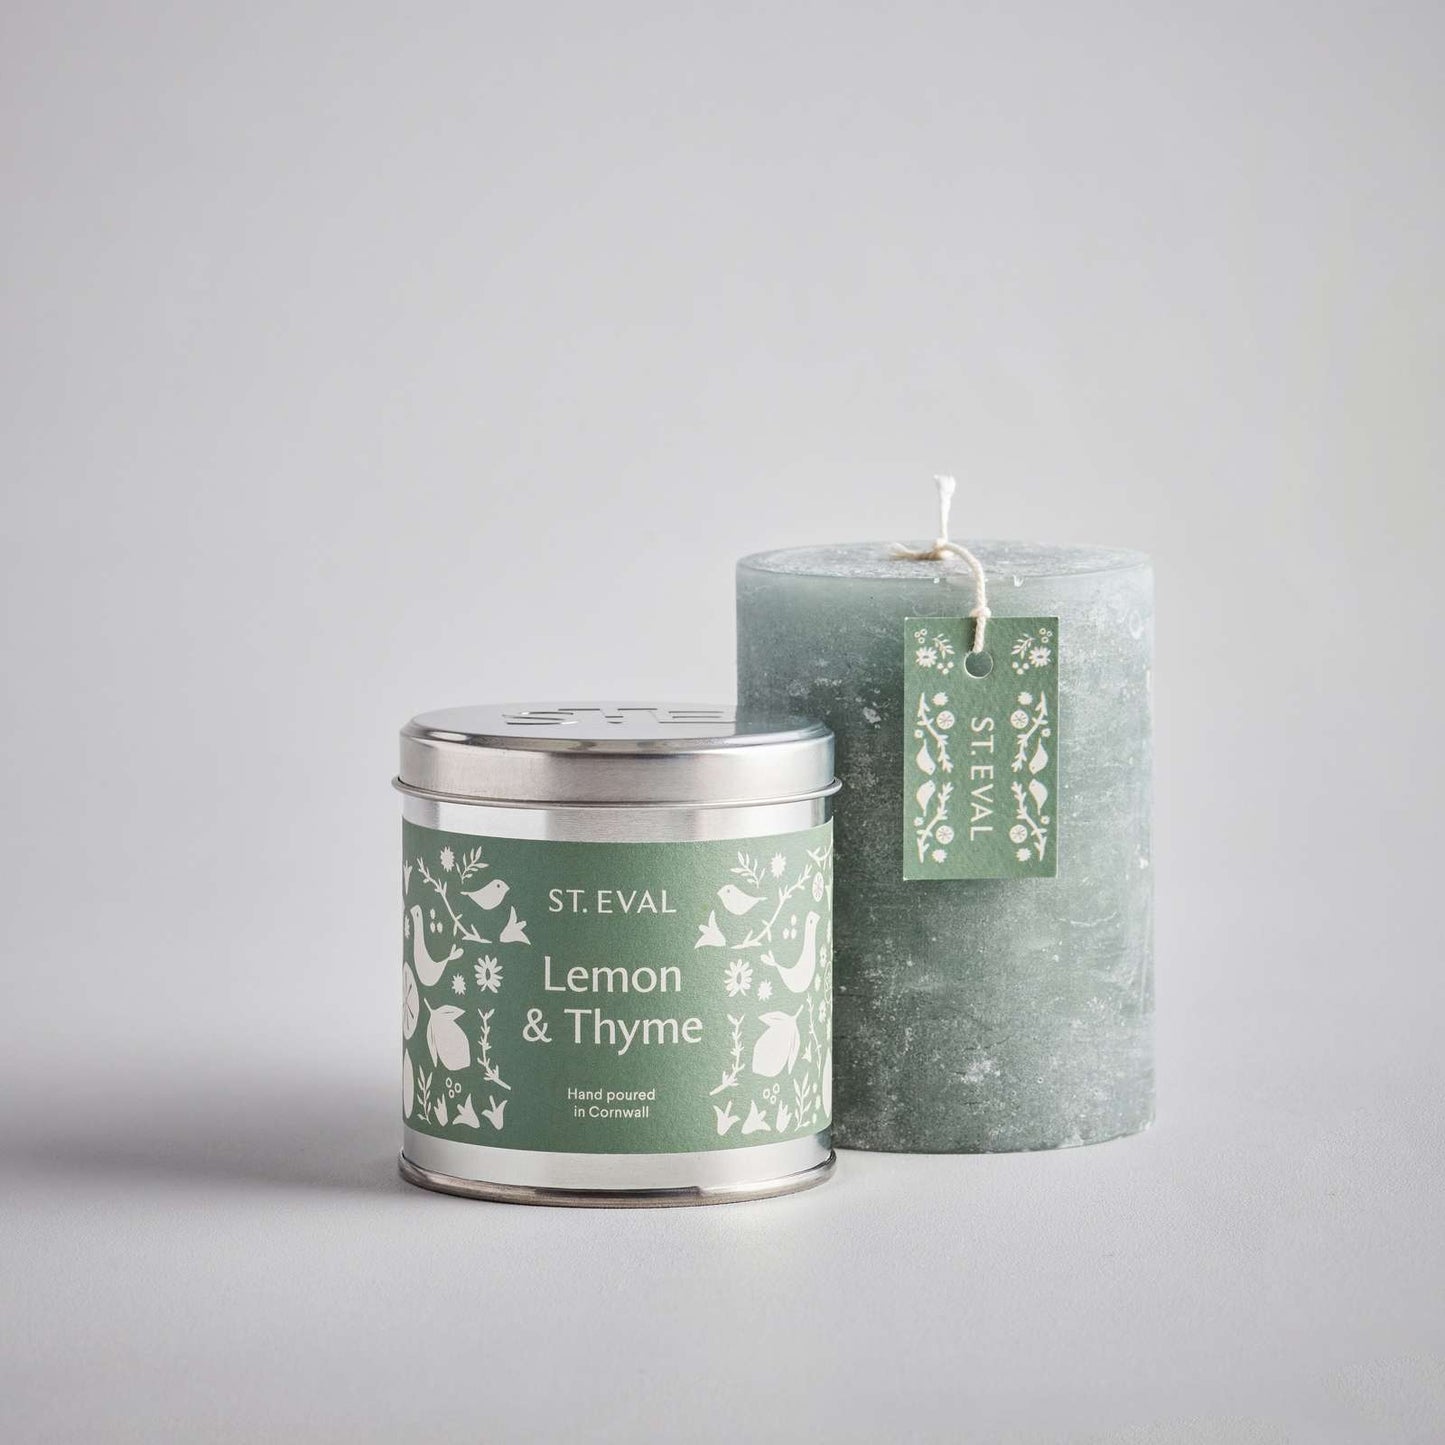 Lemon & Thyme Summer Folk Scented Tin Candle by St Eval